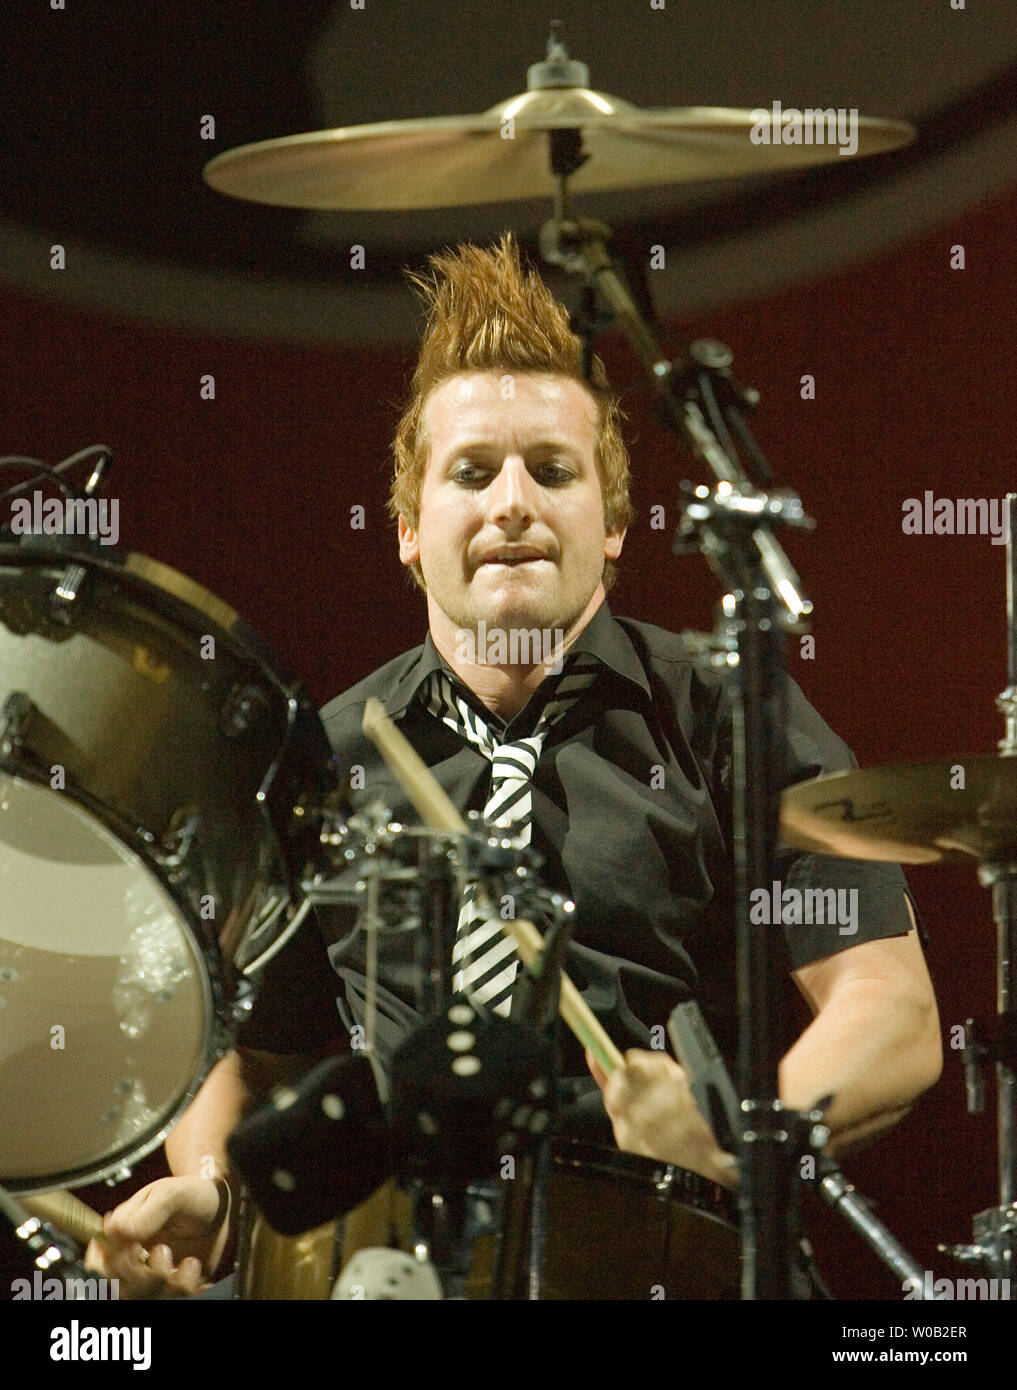 Drummer Tre Cool of the band Green Day performs at a sold out GM Place in  Vancouver, British Columbia, September 27, 2005. (UPI Photo/Heinz Ruckemann  Stock Photo - Alamy